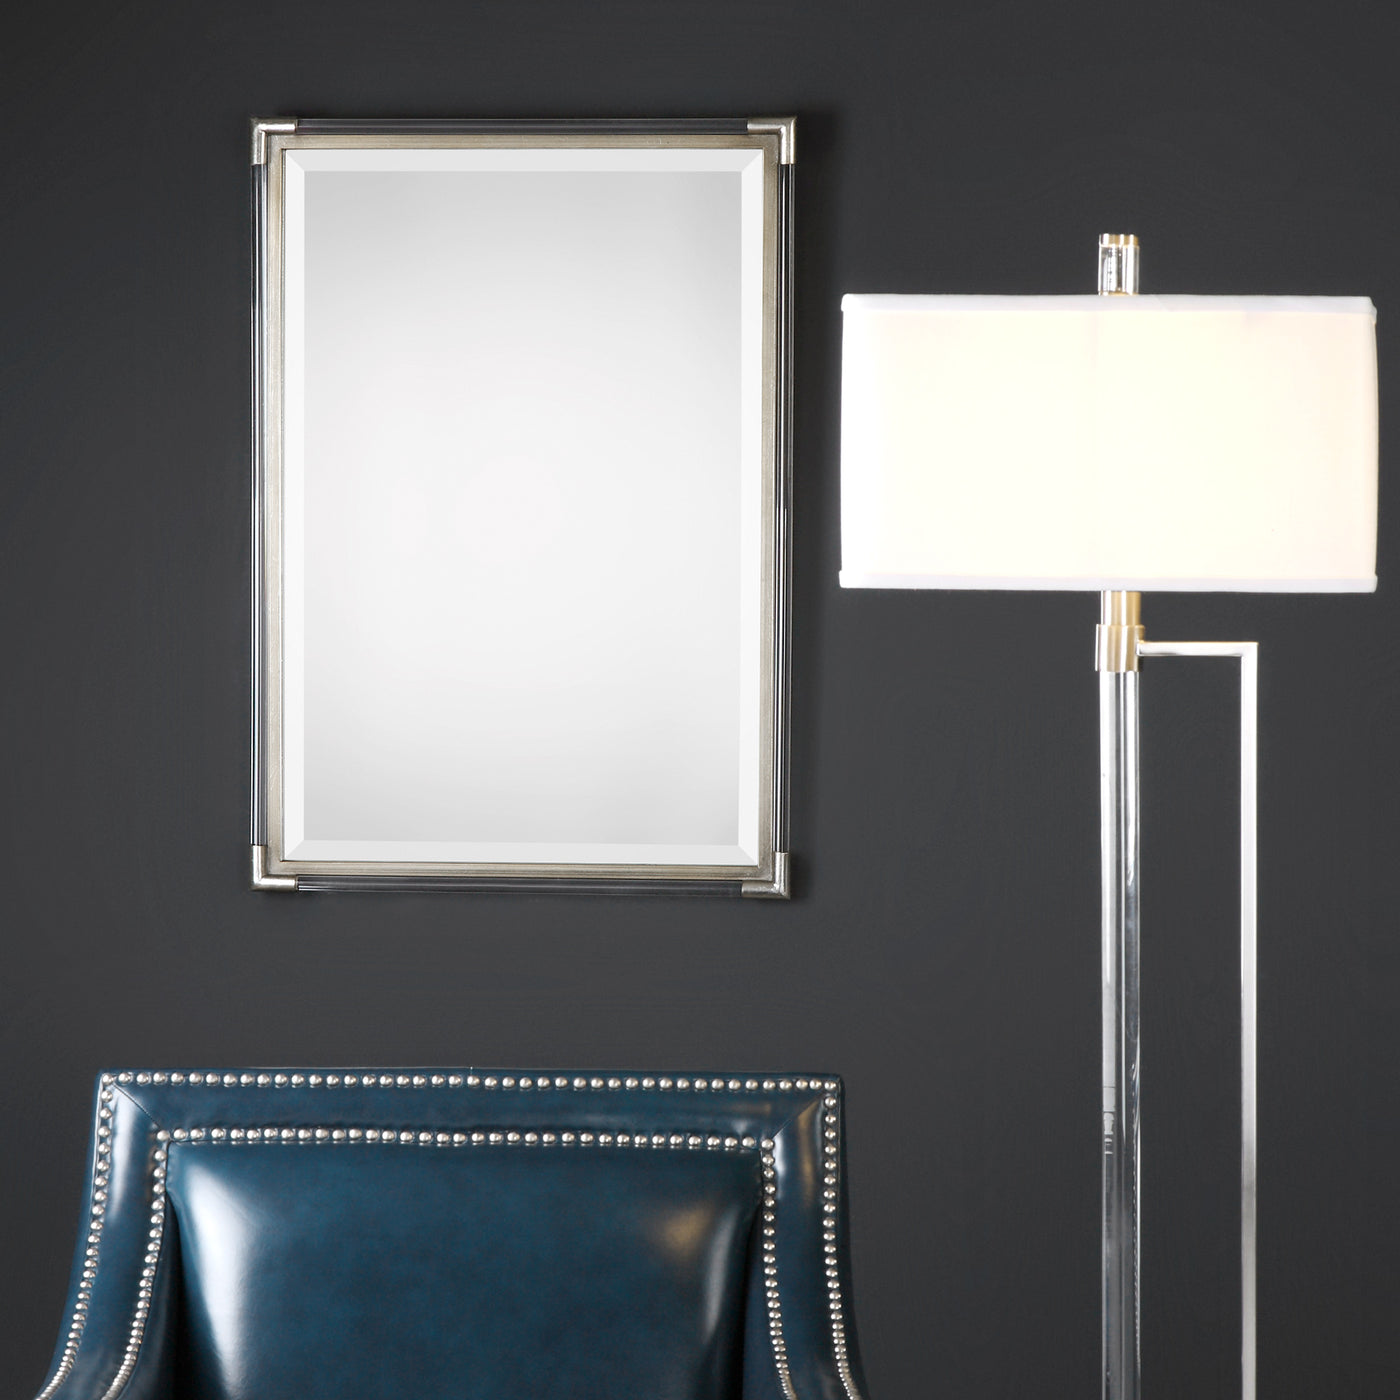 Clear Acrylic Rods Surrounding A Metallic Silver Leafed Metal Frame, Creating A Simple, Yet Elegant Mirror Piece That Adds...